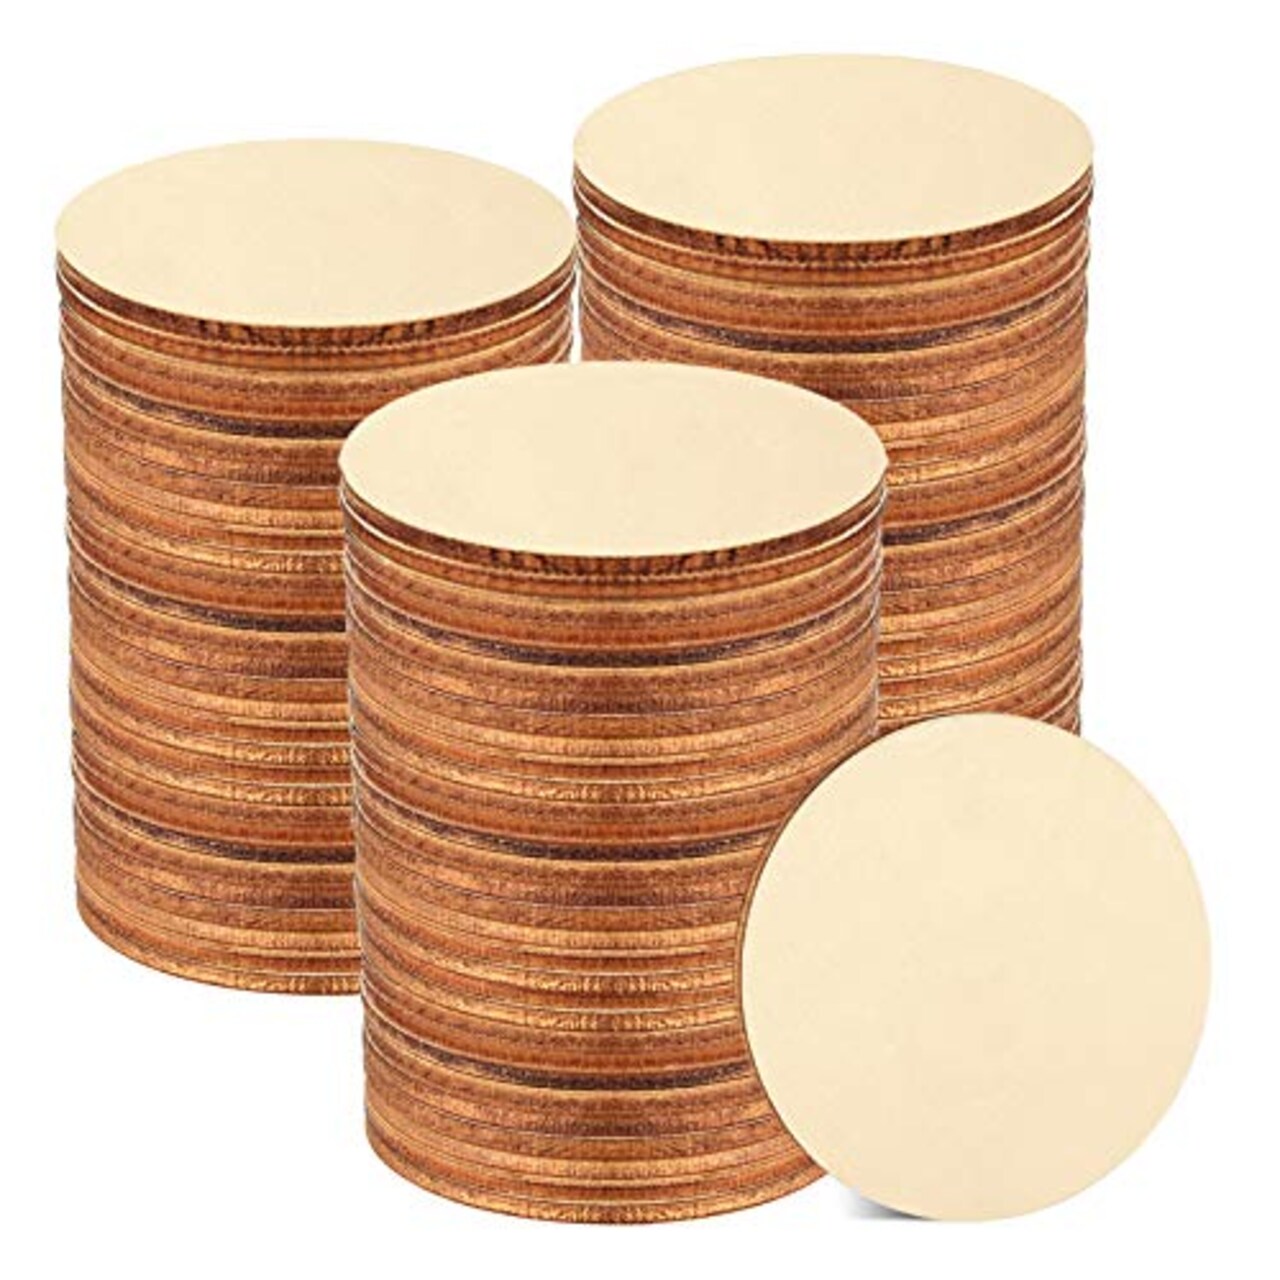 100 Pieces 3 Inch Unfinished Wooden Circles Blank Natural Round